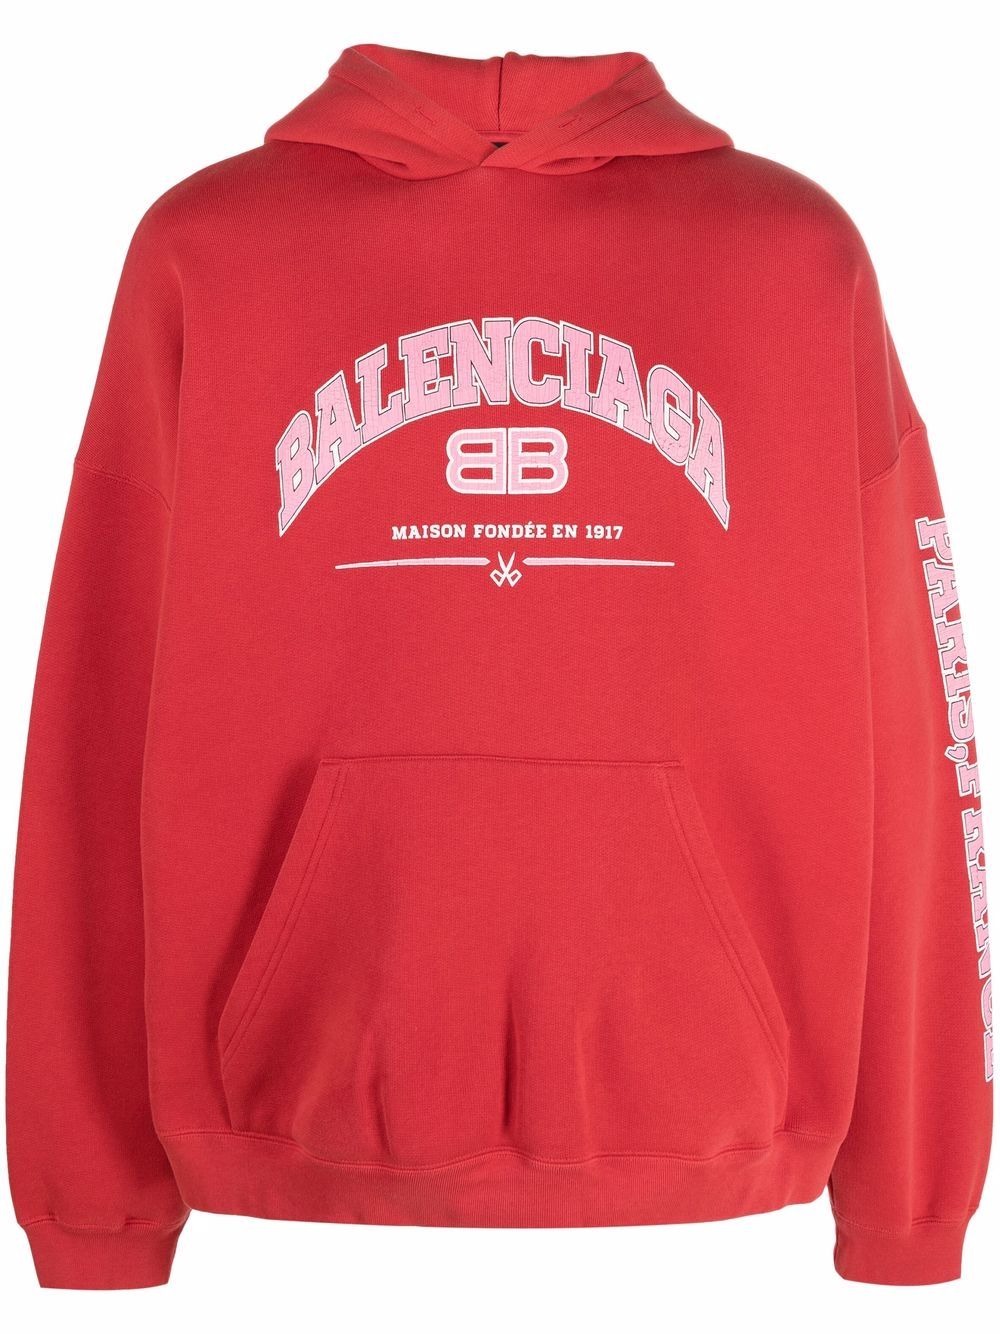 Yeezy Gap Engineered by Balenciaga Dove Hoodie Washed Black  SS22  US